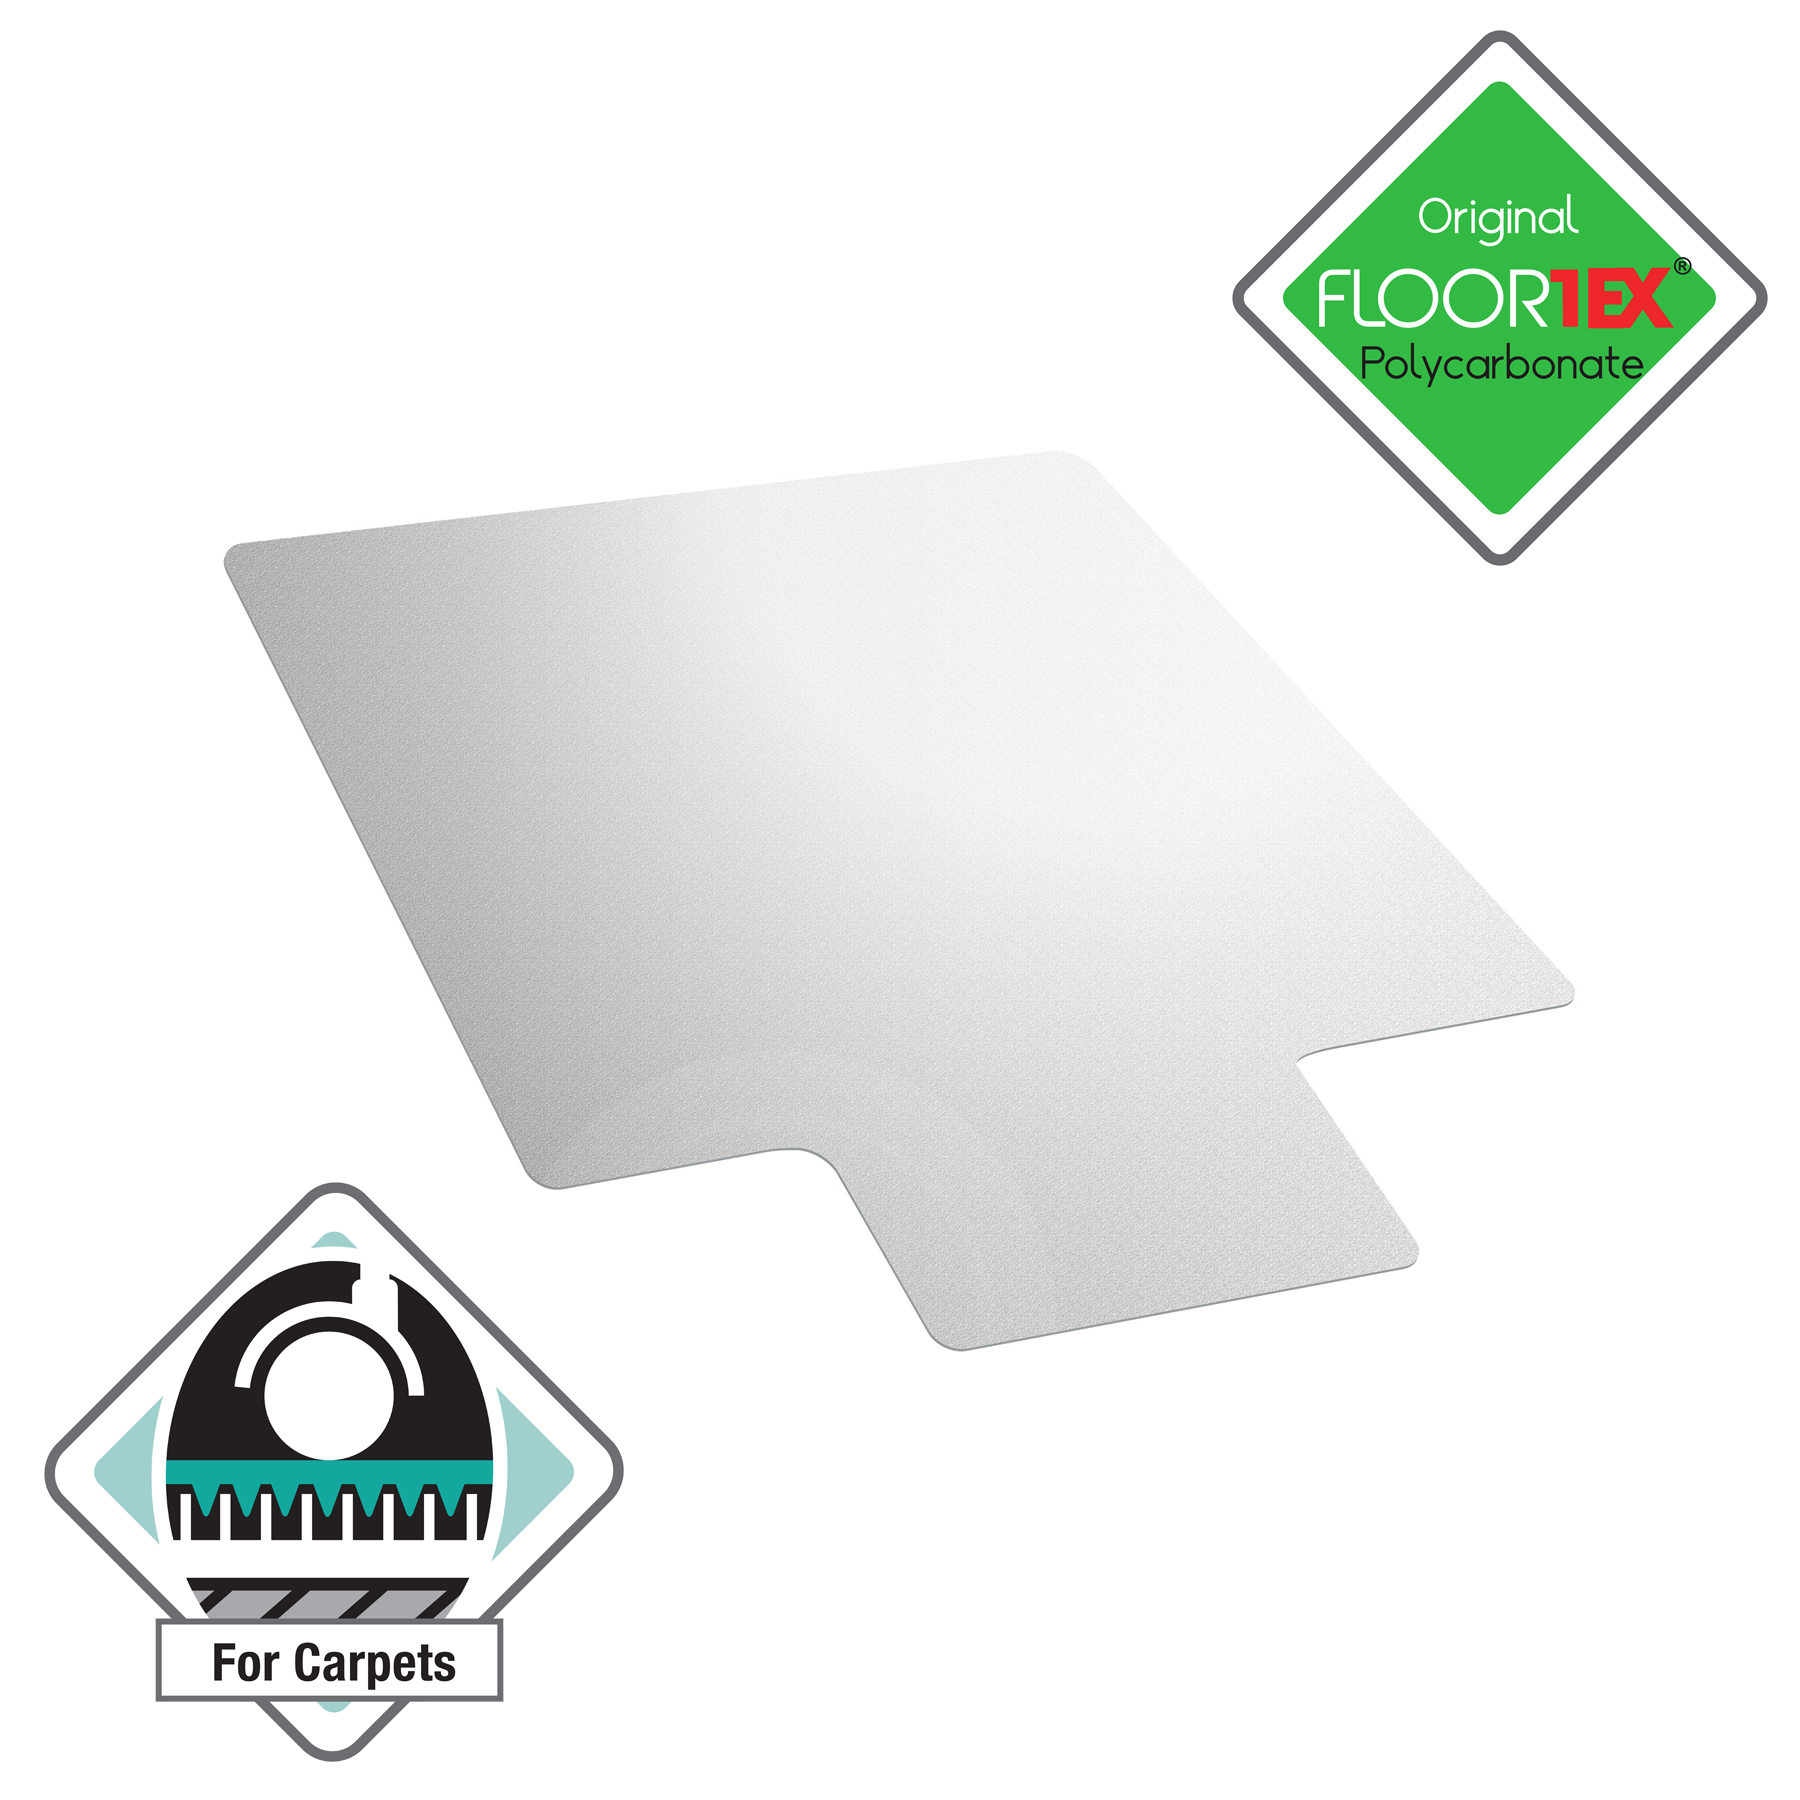 Ultimat® Polycarbonate Lipped Chair Mat for Carpets up to 1/2" - 48 x 53" - image 3 of 13